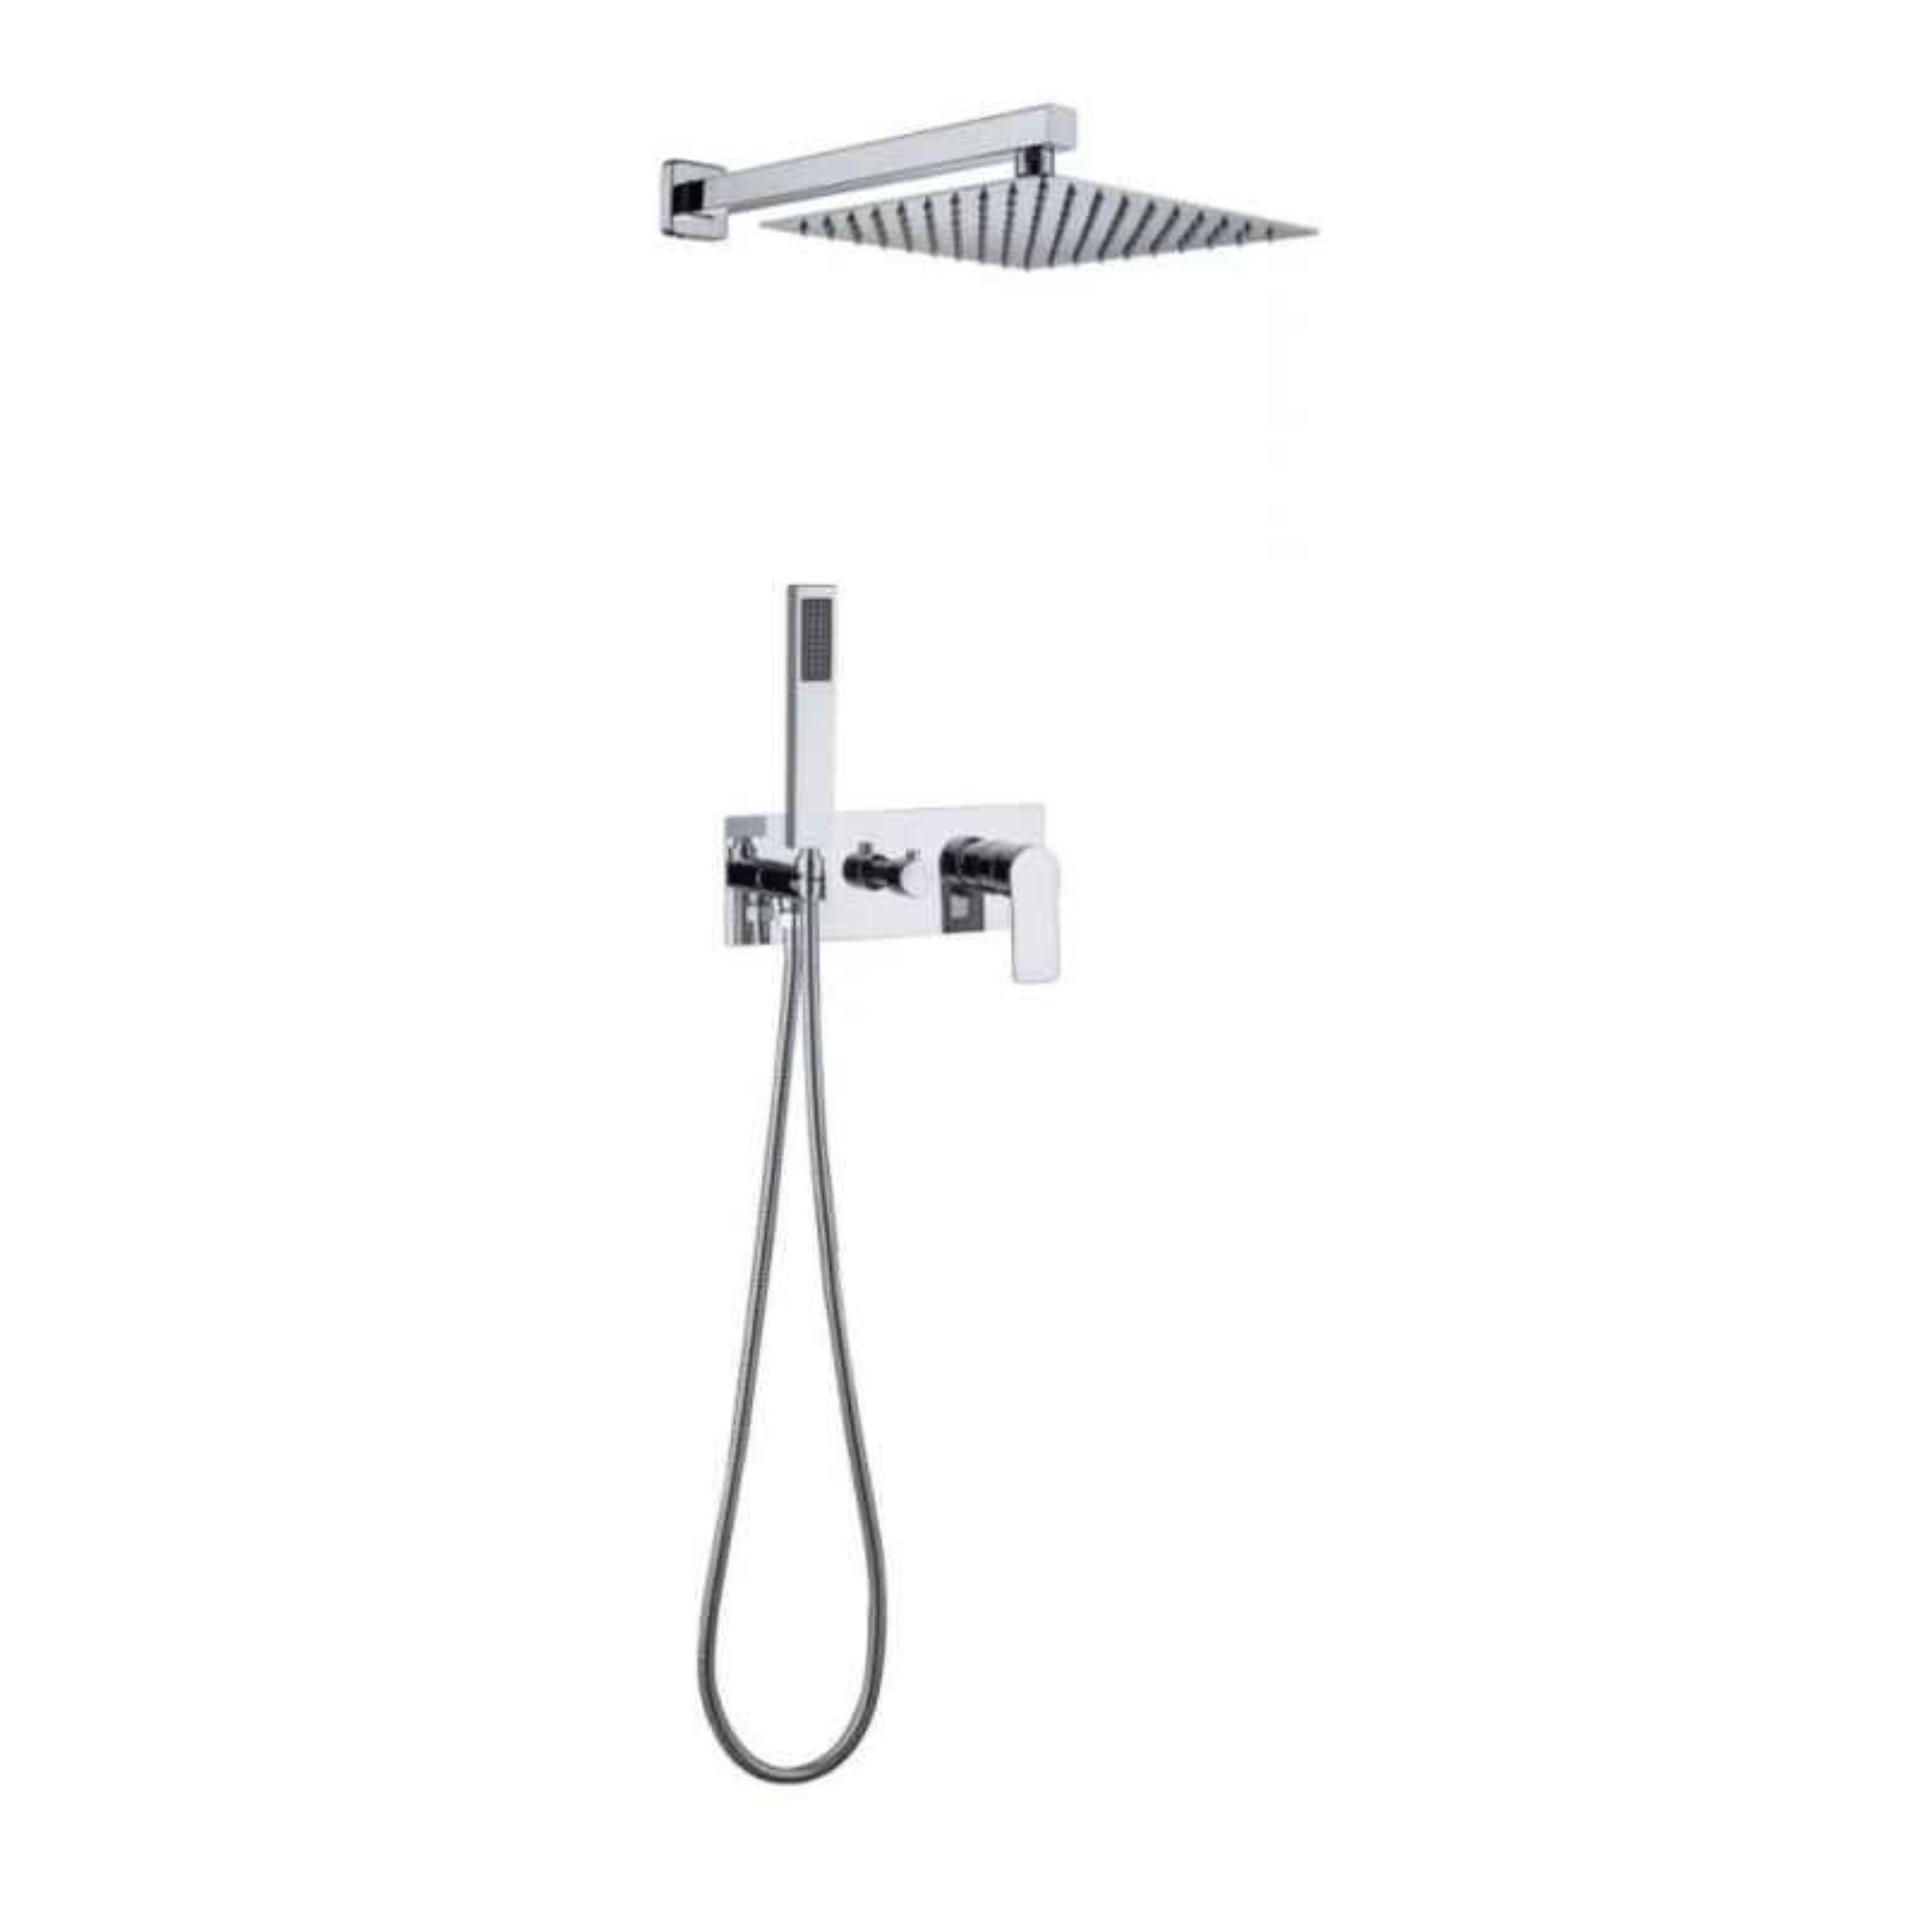 Buy Bathroom Concealed Wall Mounted Two-Function Square Overhead Rain Shower Set Chrome/Matte Black - RS-9003 & RS-9003B | Shop at Supply Master Accra, Ghana Shower Set Buy Tools hardware Building materials